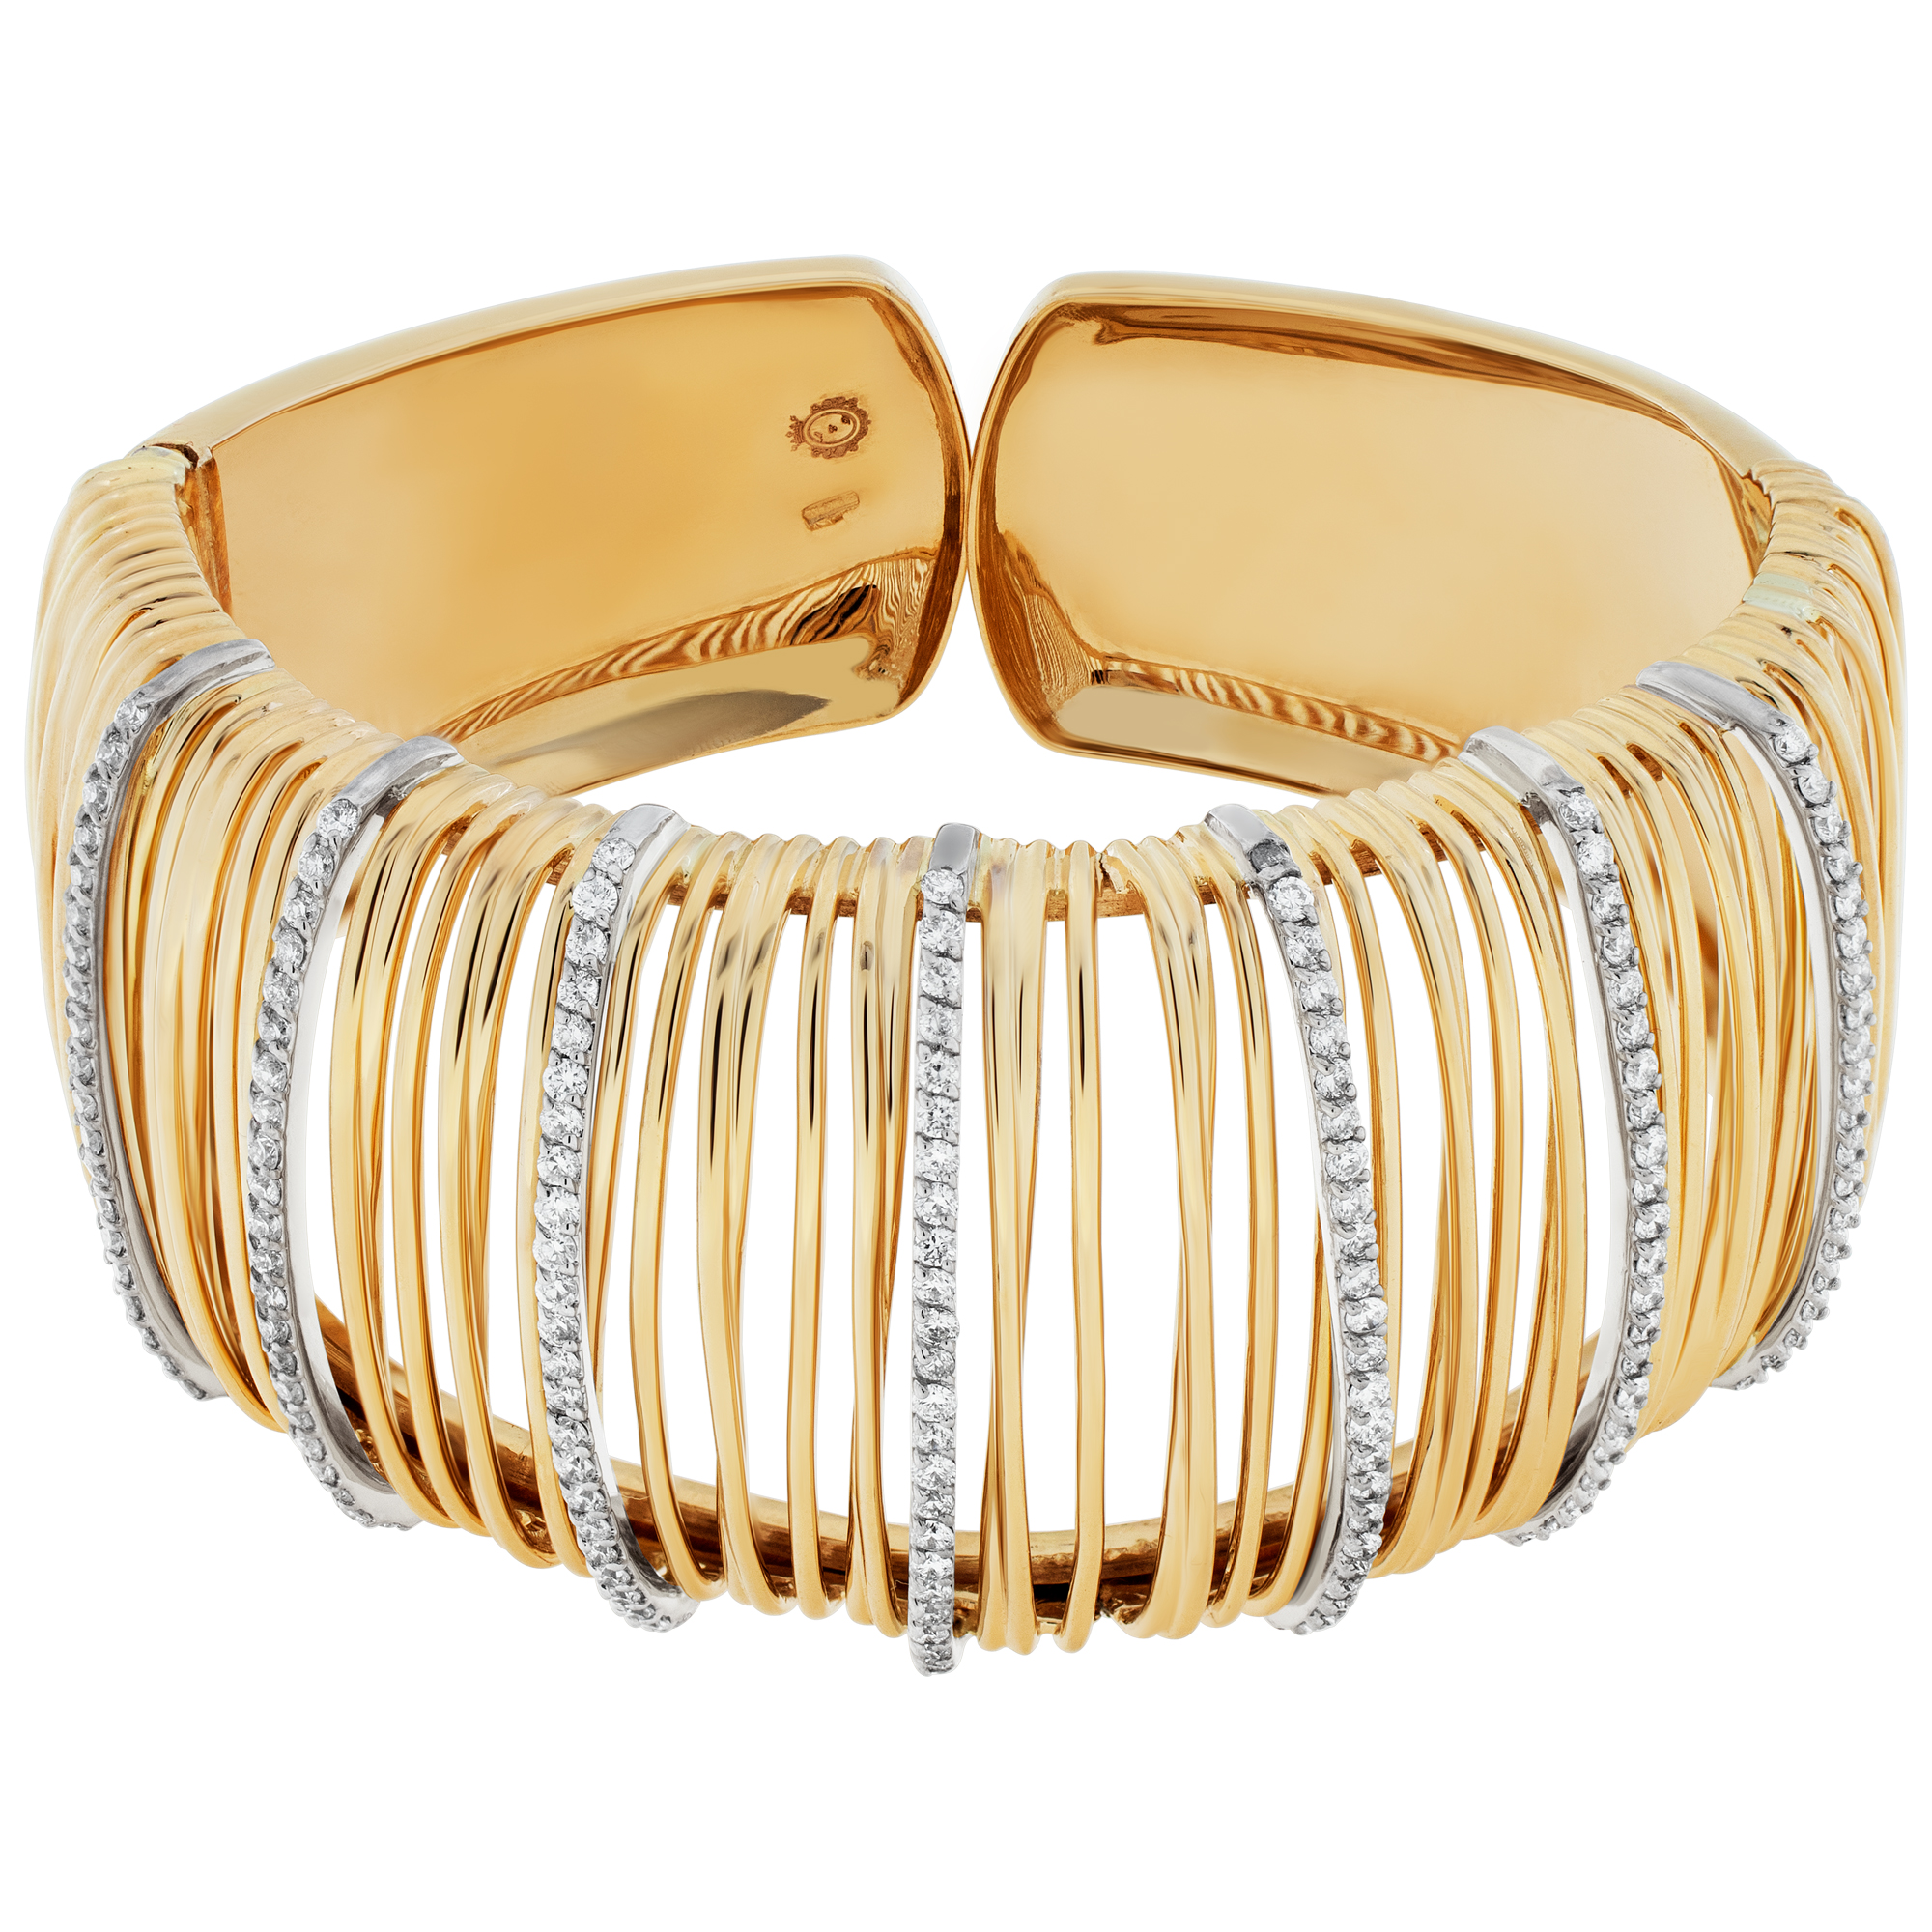 Diamond bangle in 14k yellow gold. Round brilliant cut diamond total approx. weight 1.50 carat, estimate: G-H color, VS clarity